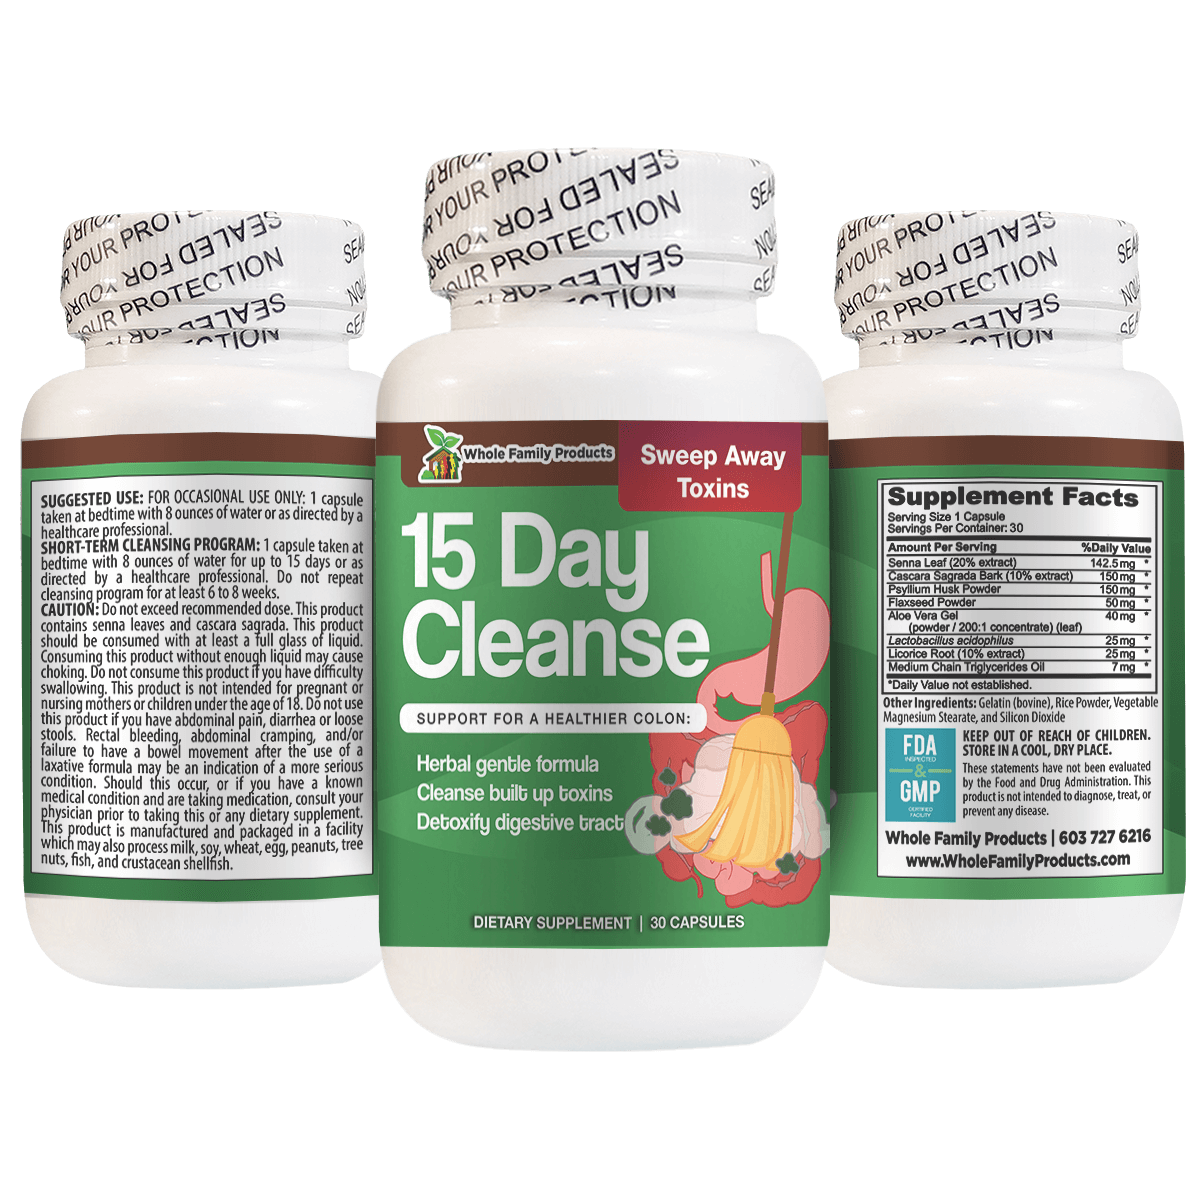 15 Day Cleanse Helps Detoxify Digestive Tract